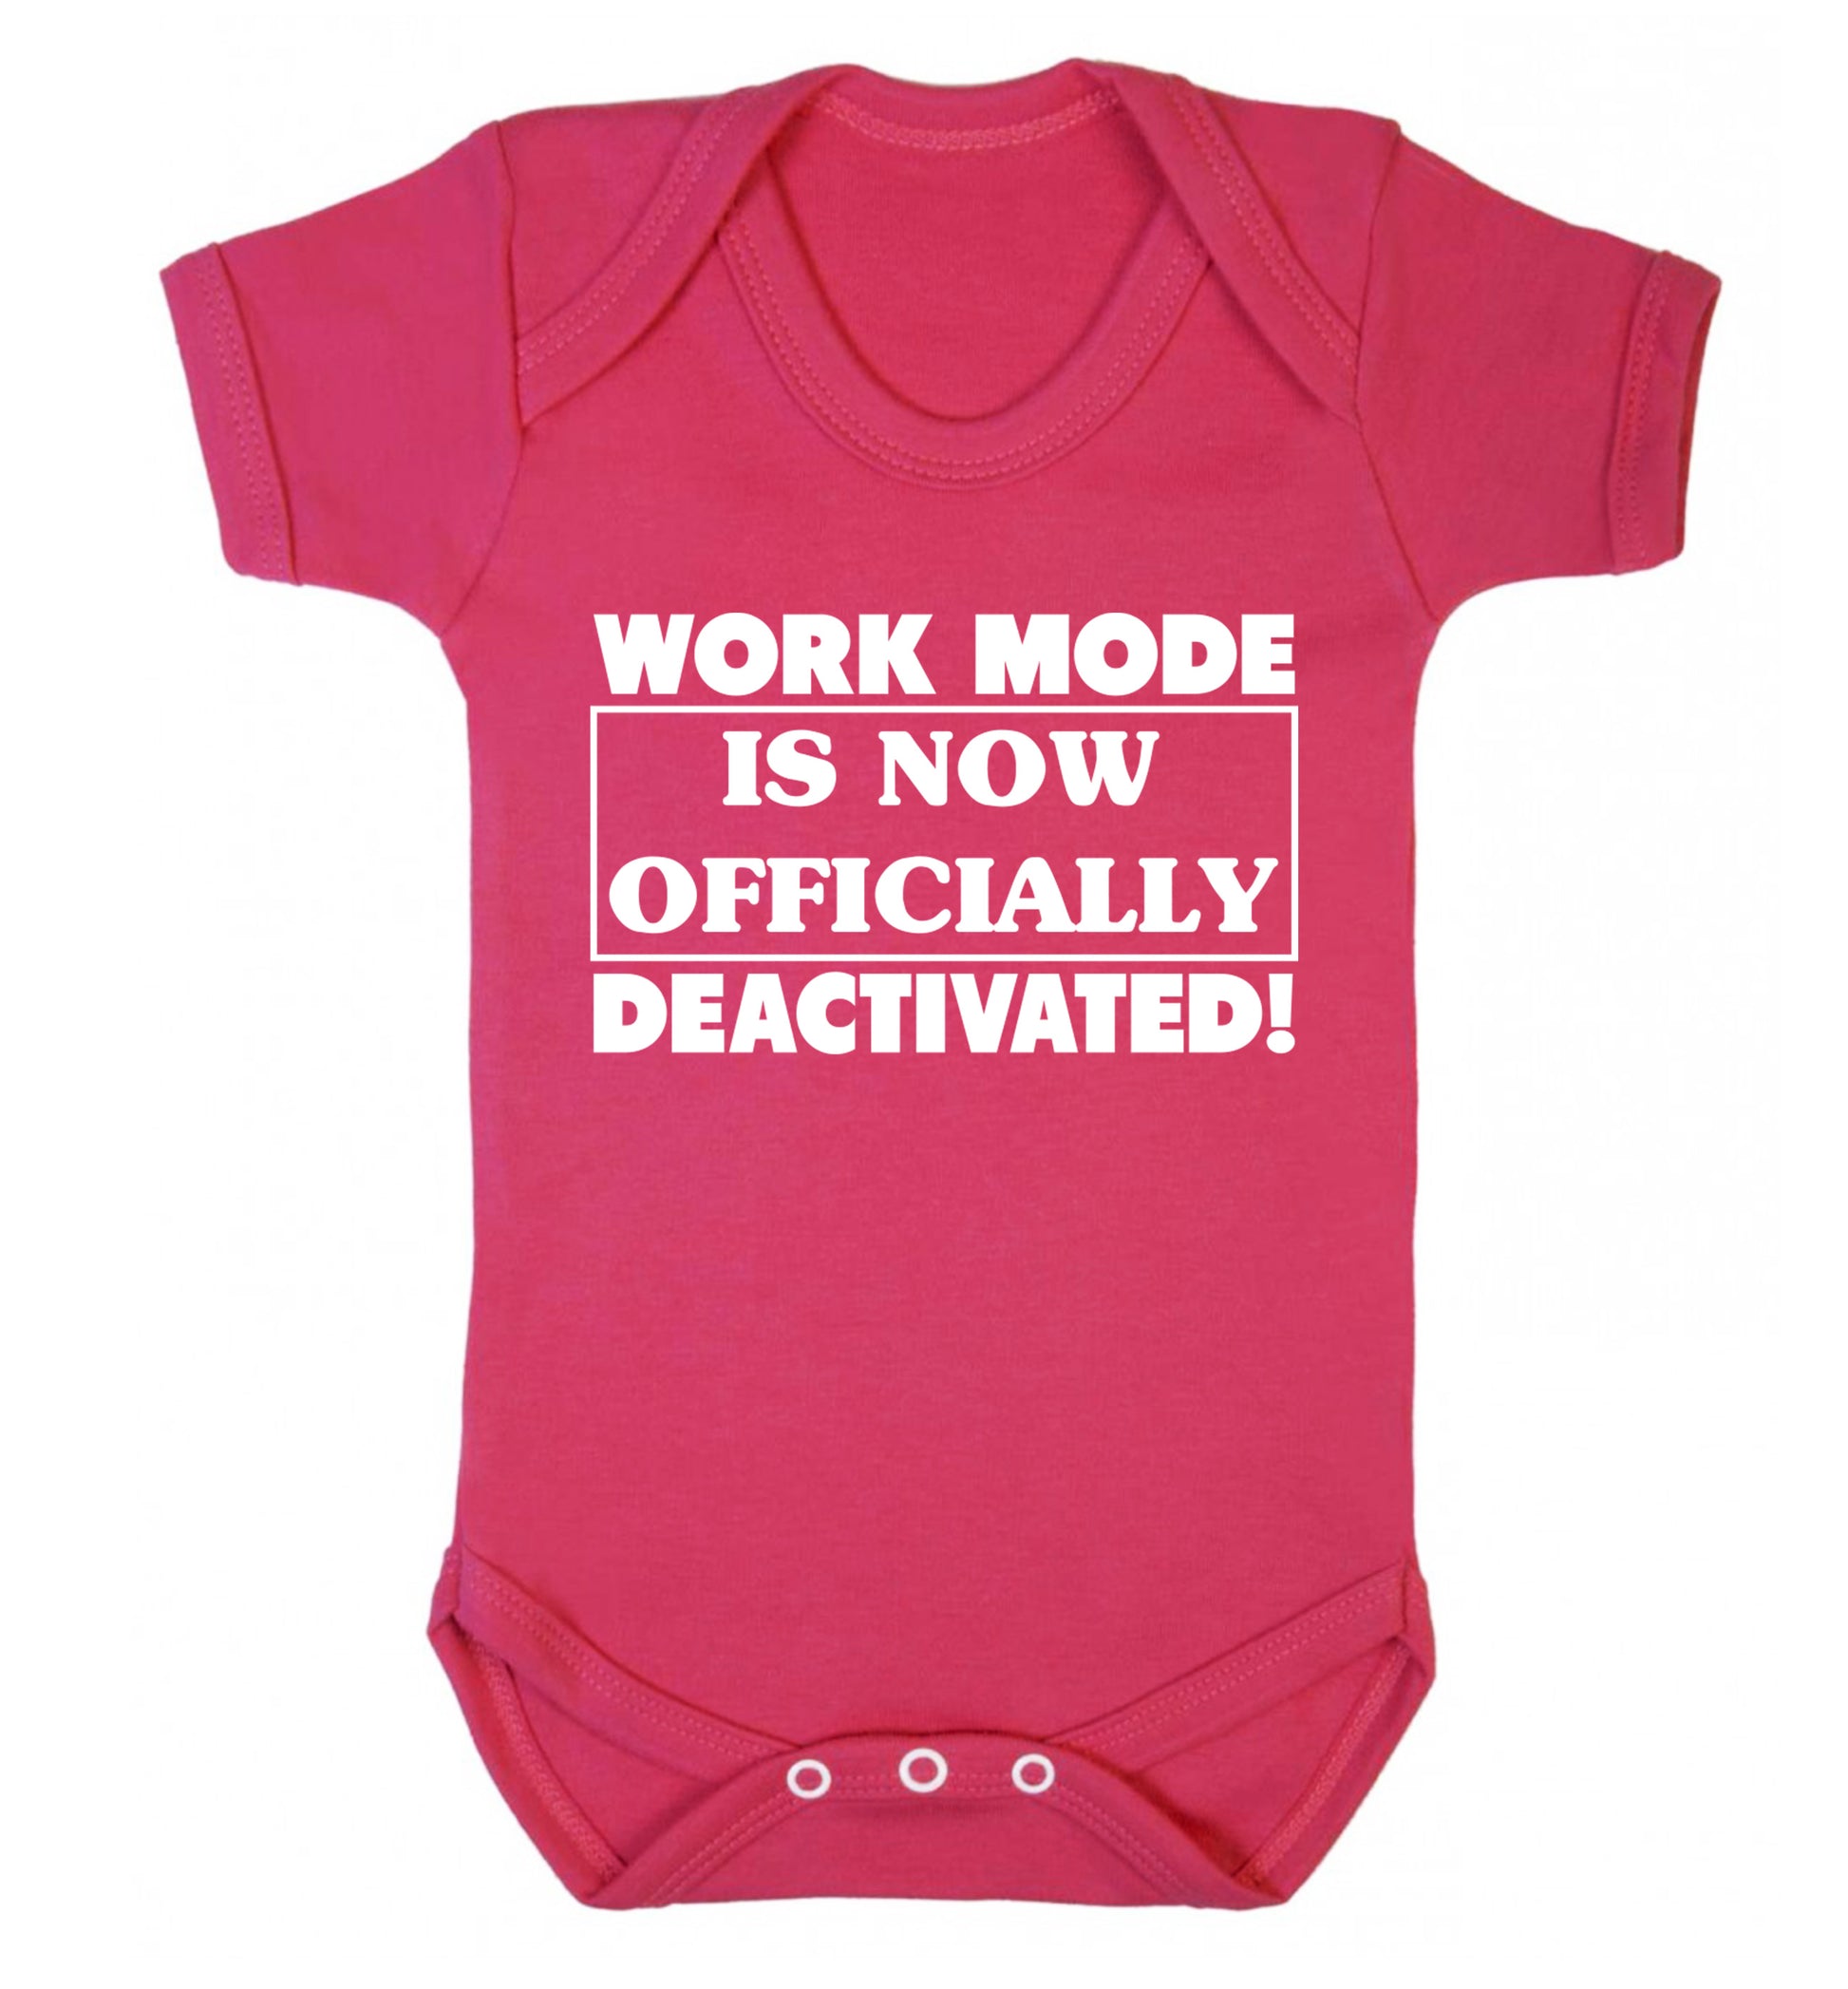 Work mode is now officially deactivated Baby Vest dark pink 18-24 months